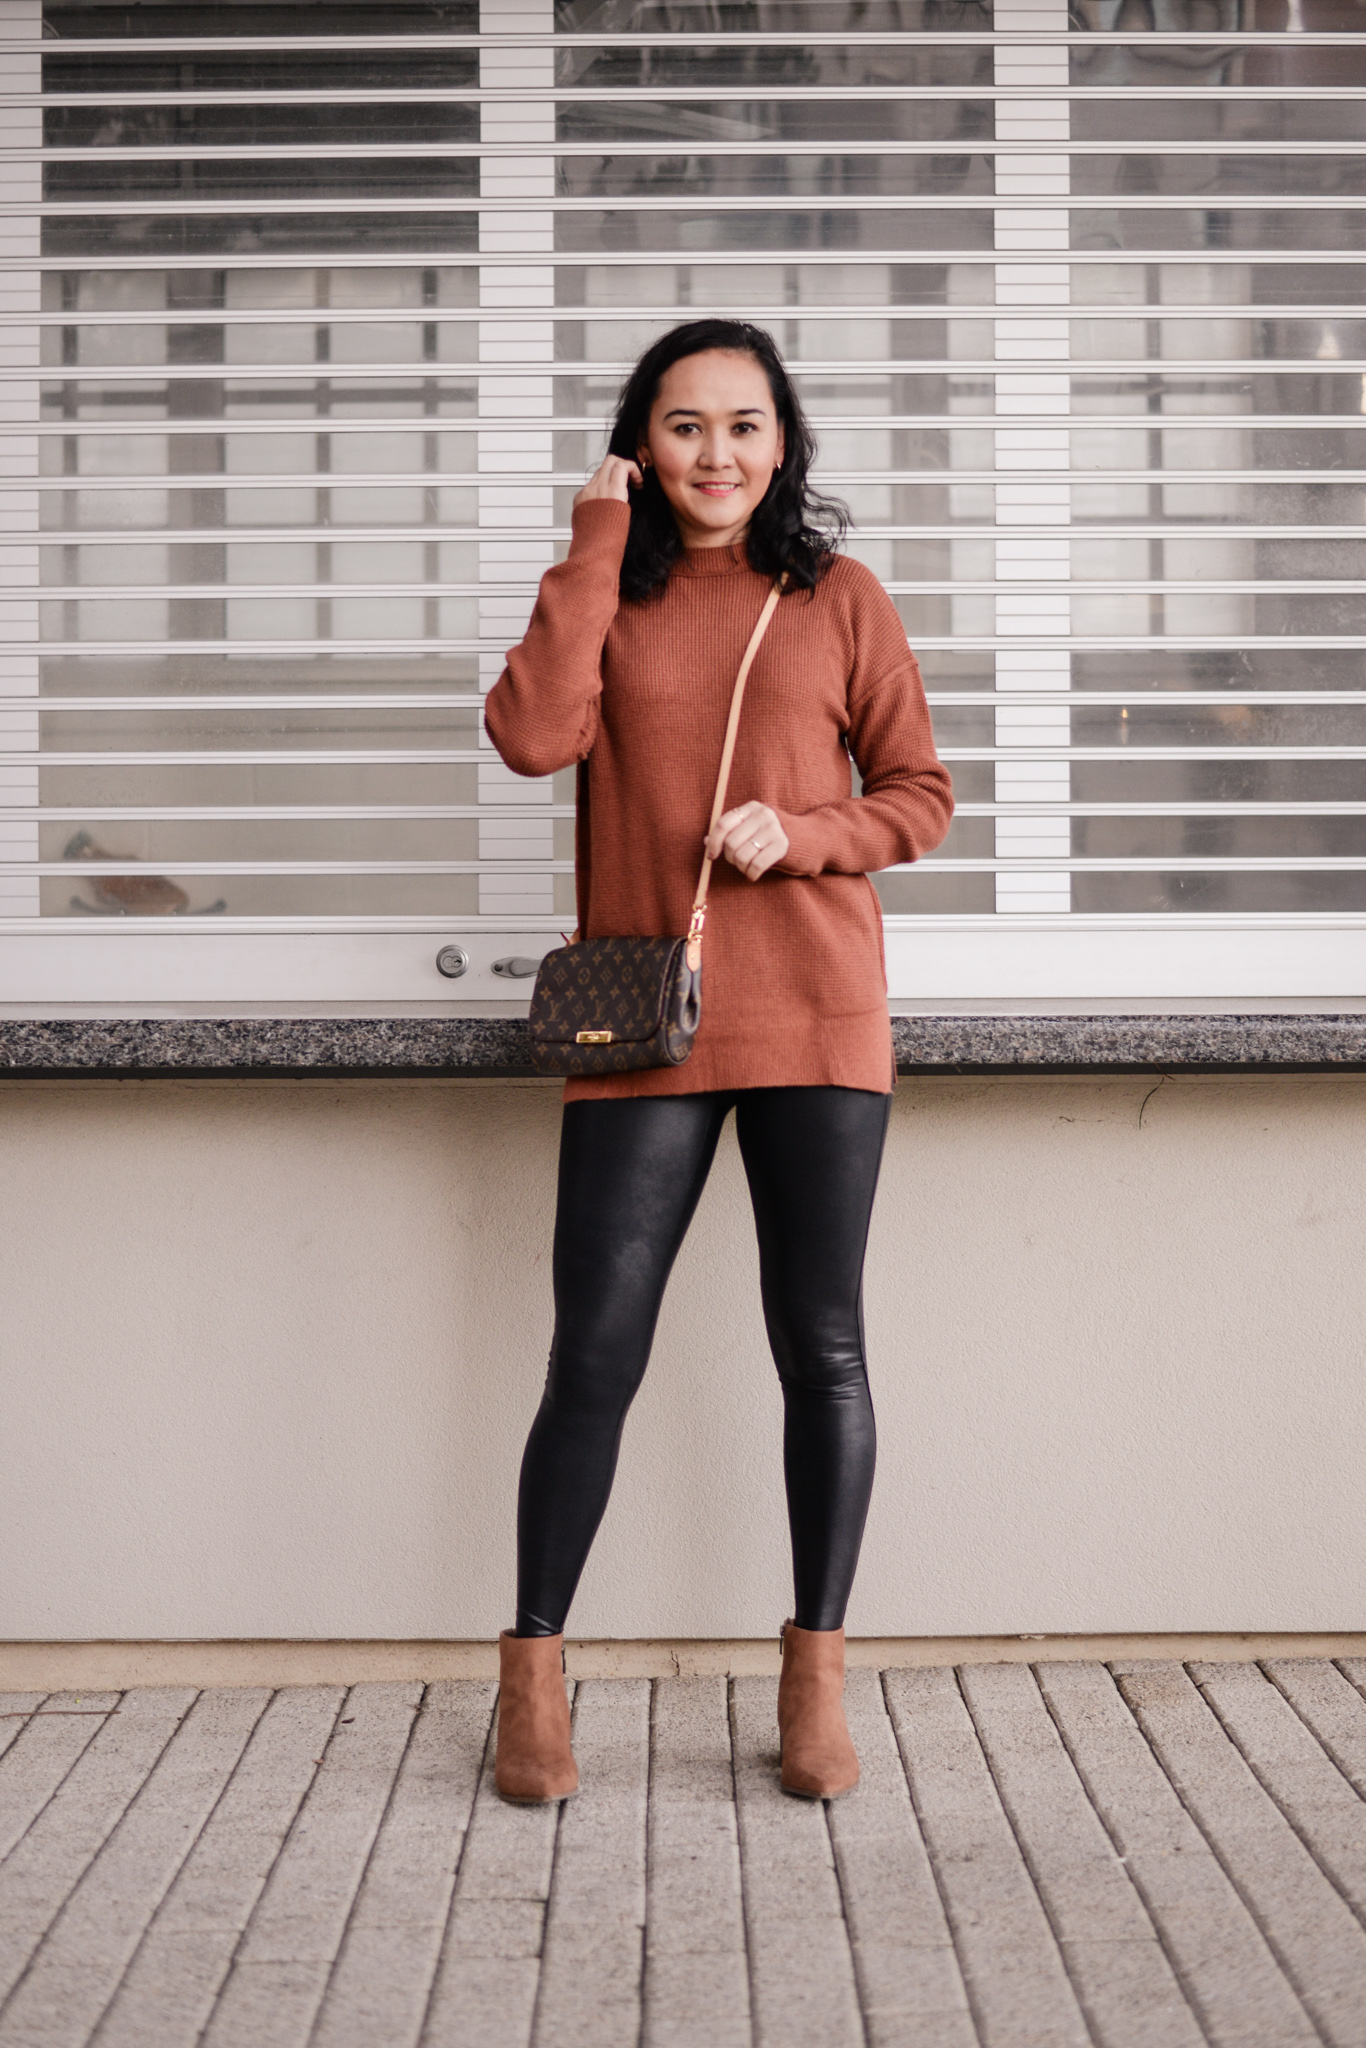 split hem leggings outfit ideas  Outfits with leggings, Ankle